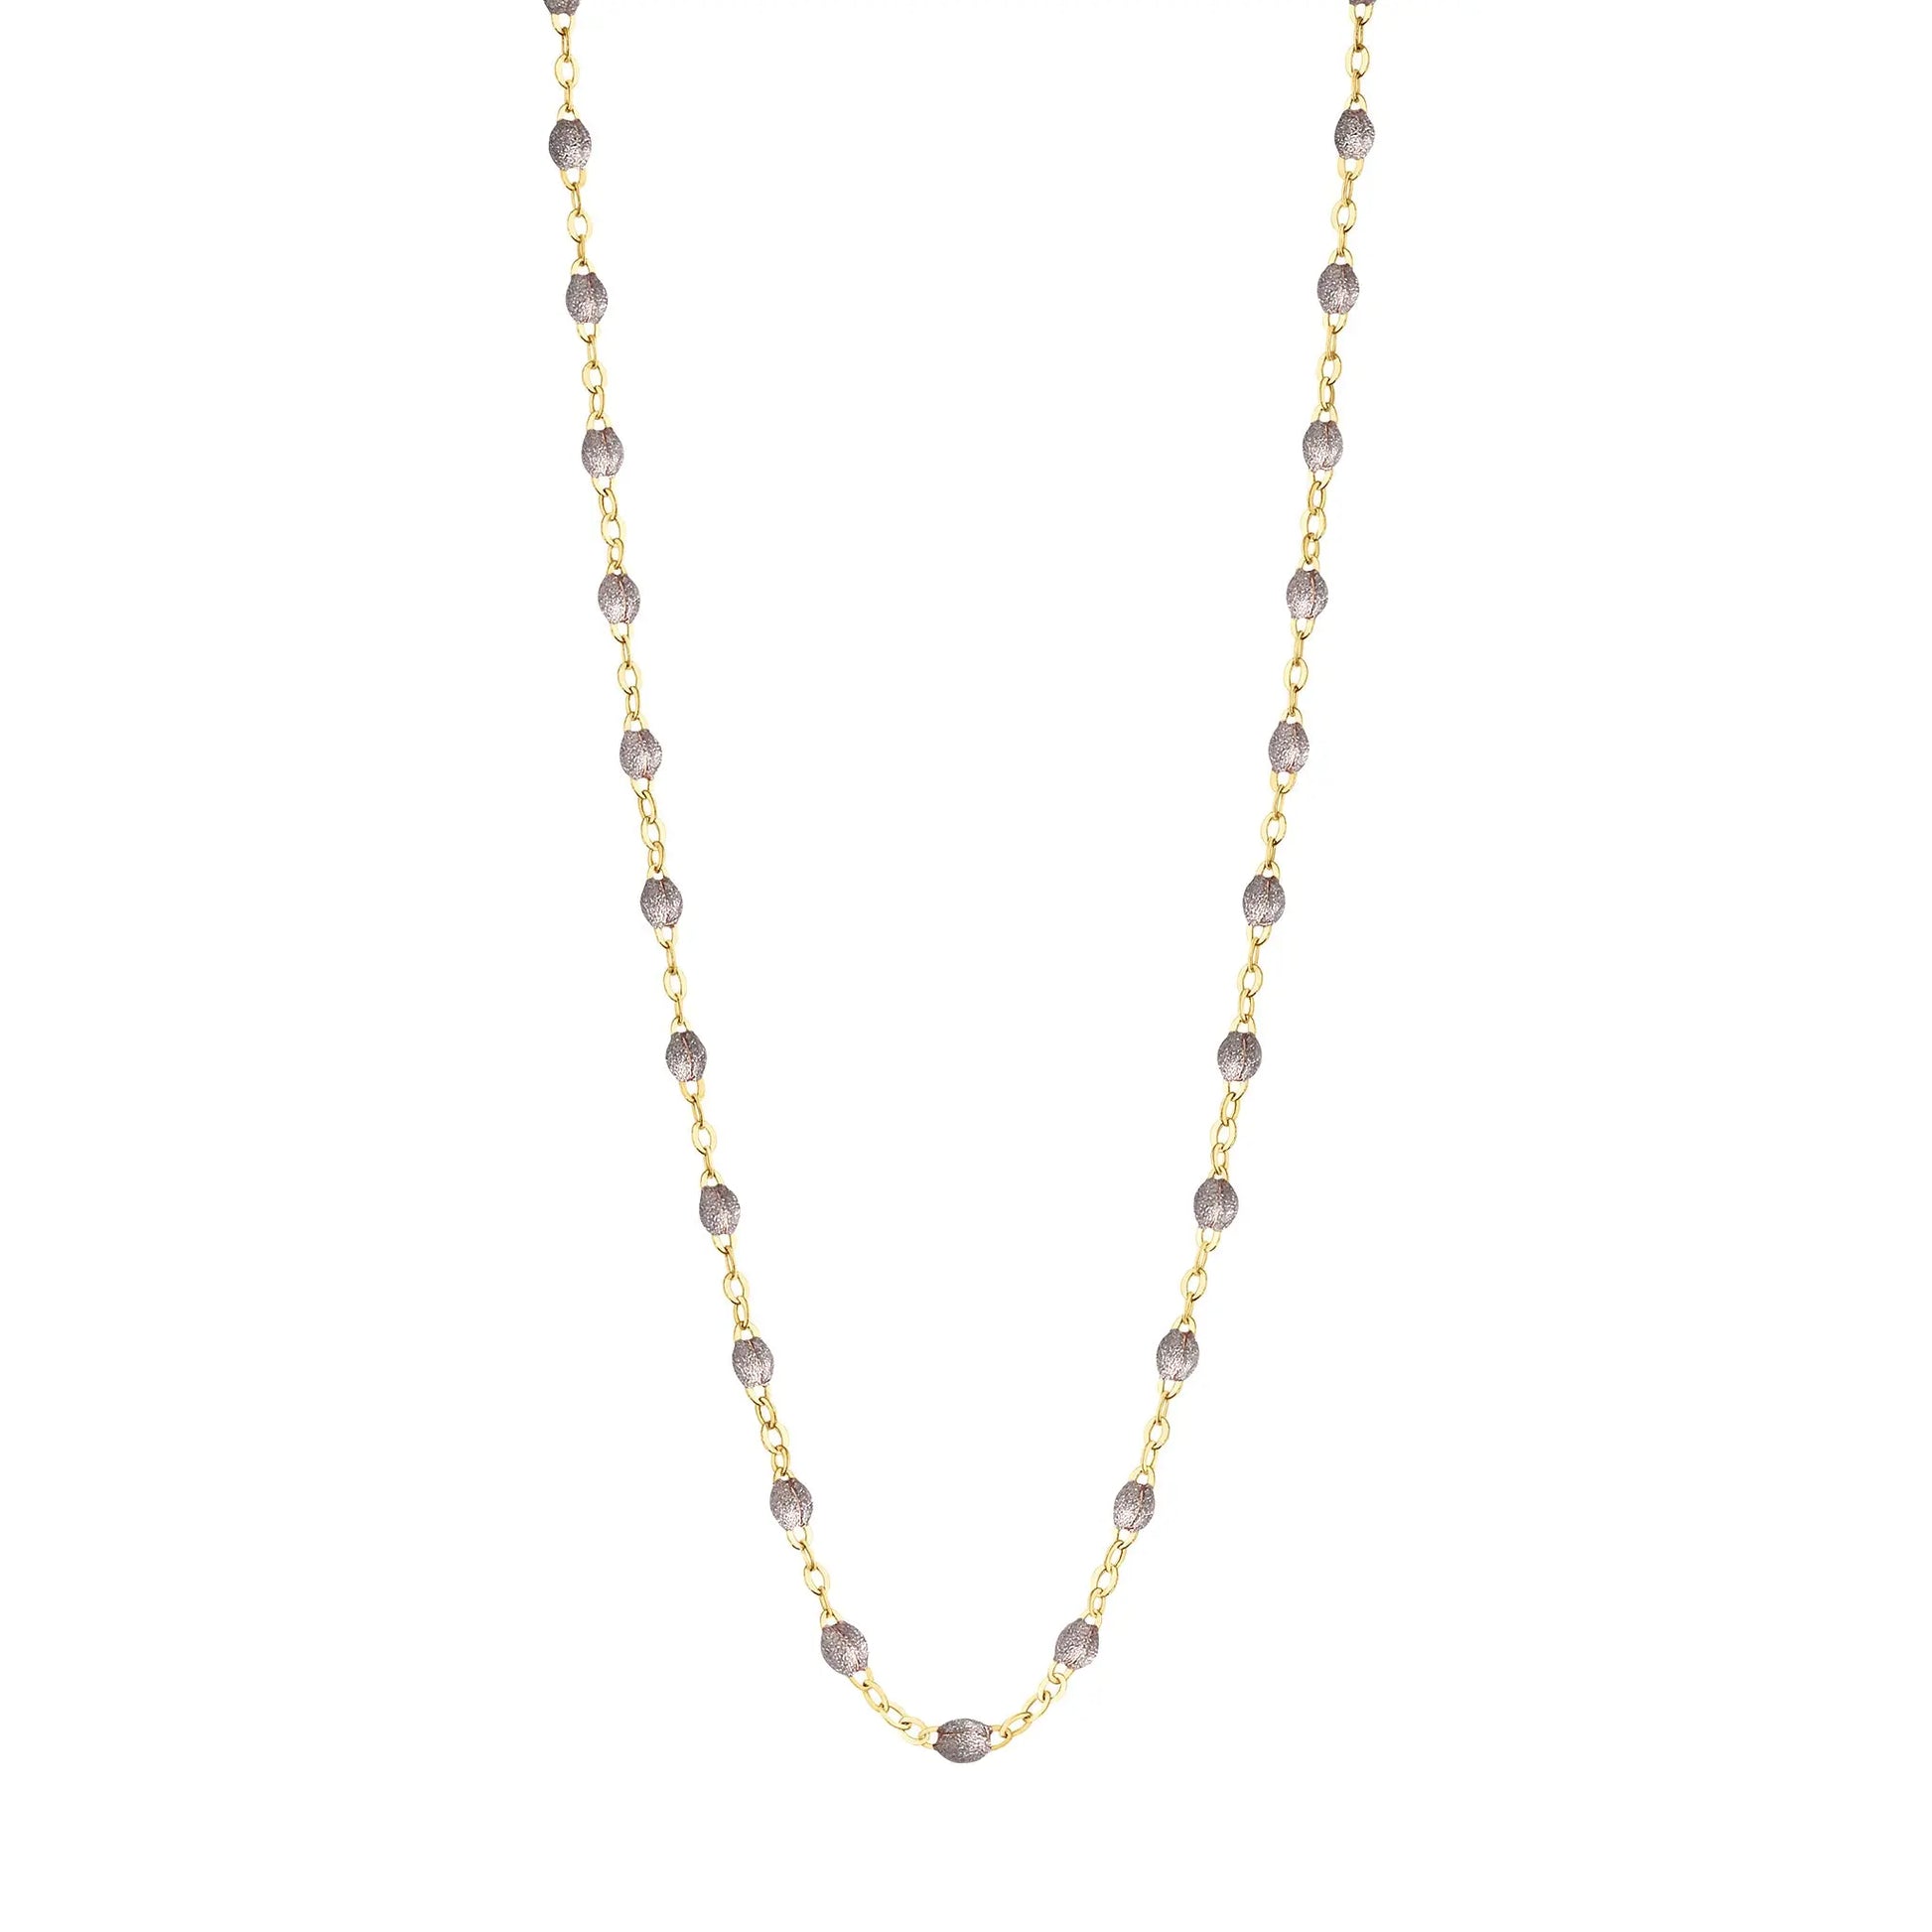 Stack you necklace layers with this versatile beaded chain! The Classic Gigi Necklace by gigi CLOZEAU features 18 carat yellow gold, and striking Silver resin jewels for an everyday effortless appearance. Handcrafted in 18k yellow gold. The beads measure 1.50mm in diameter and is finished with a spring ring clasp. The length is 16.5 inches.